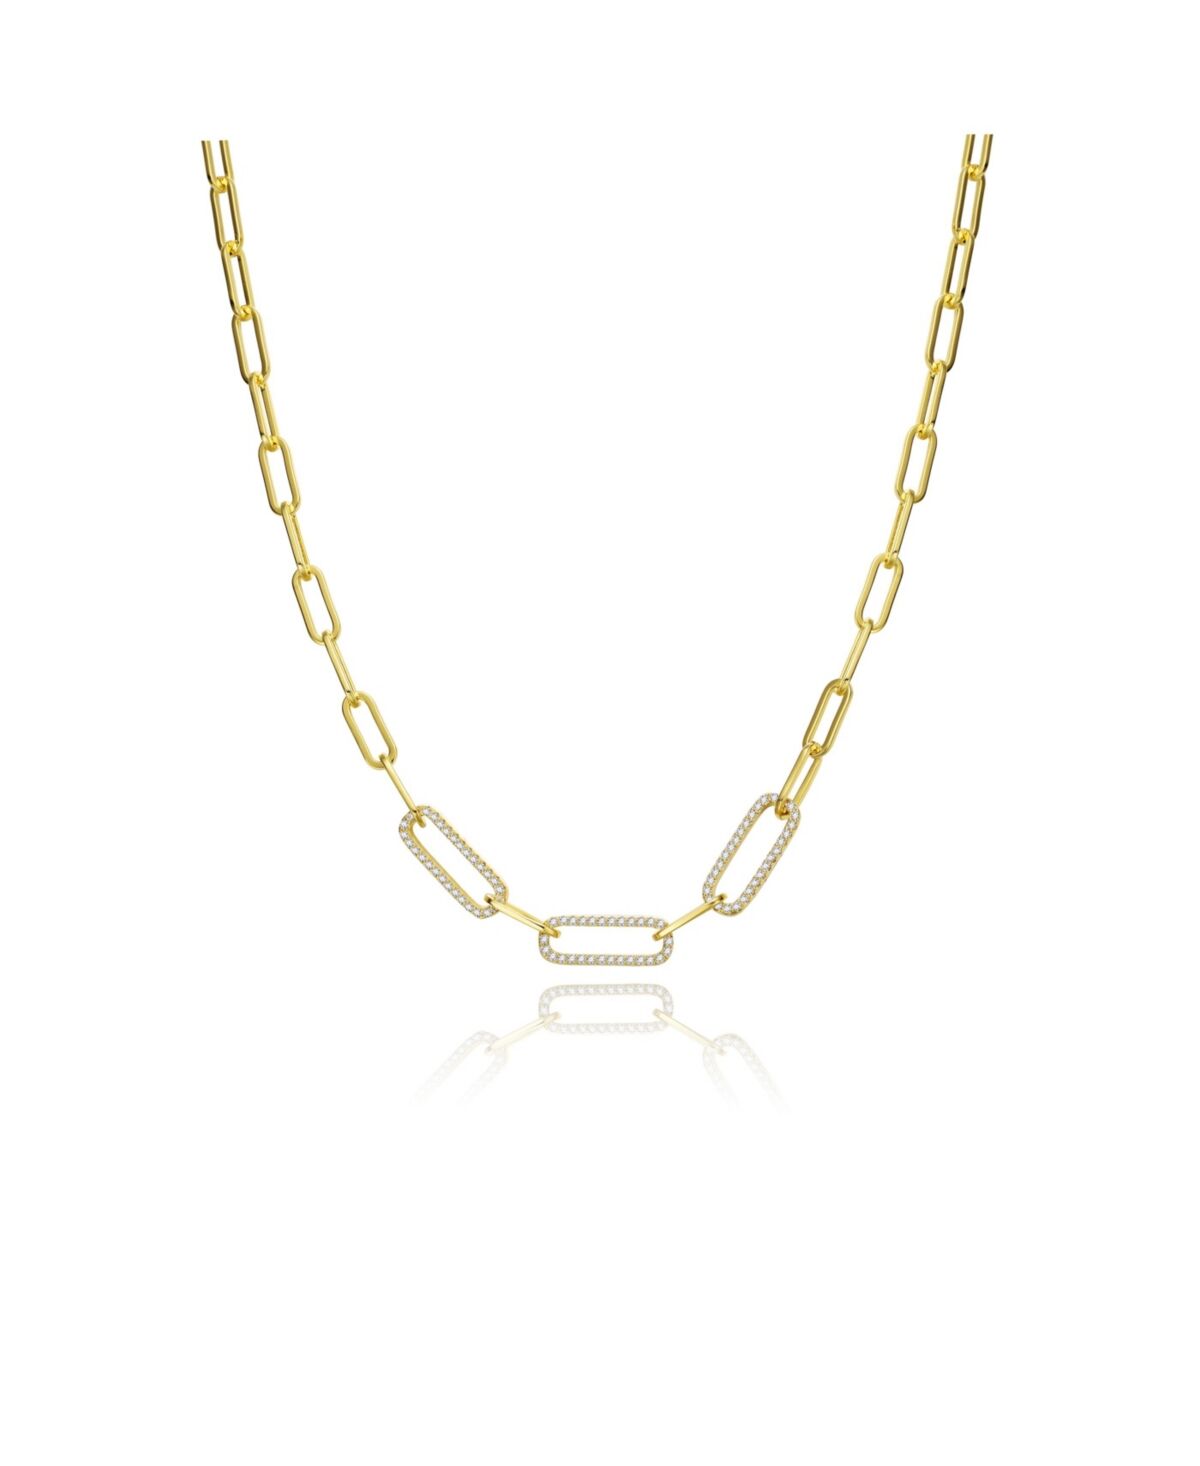 Rachel Glauber GiGiGirl Teens/Young Adults 14k Yellow Gold Plated With Cubic Zirconia Elongated Cable Link Chain Necklace - Gold